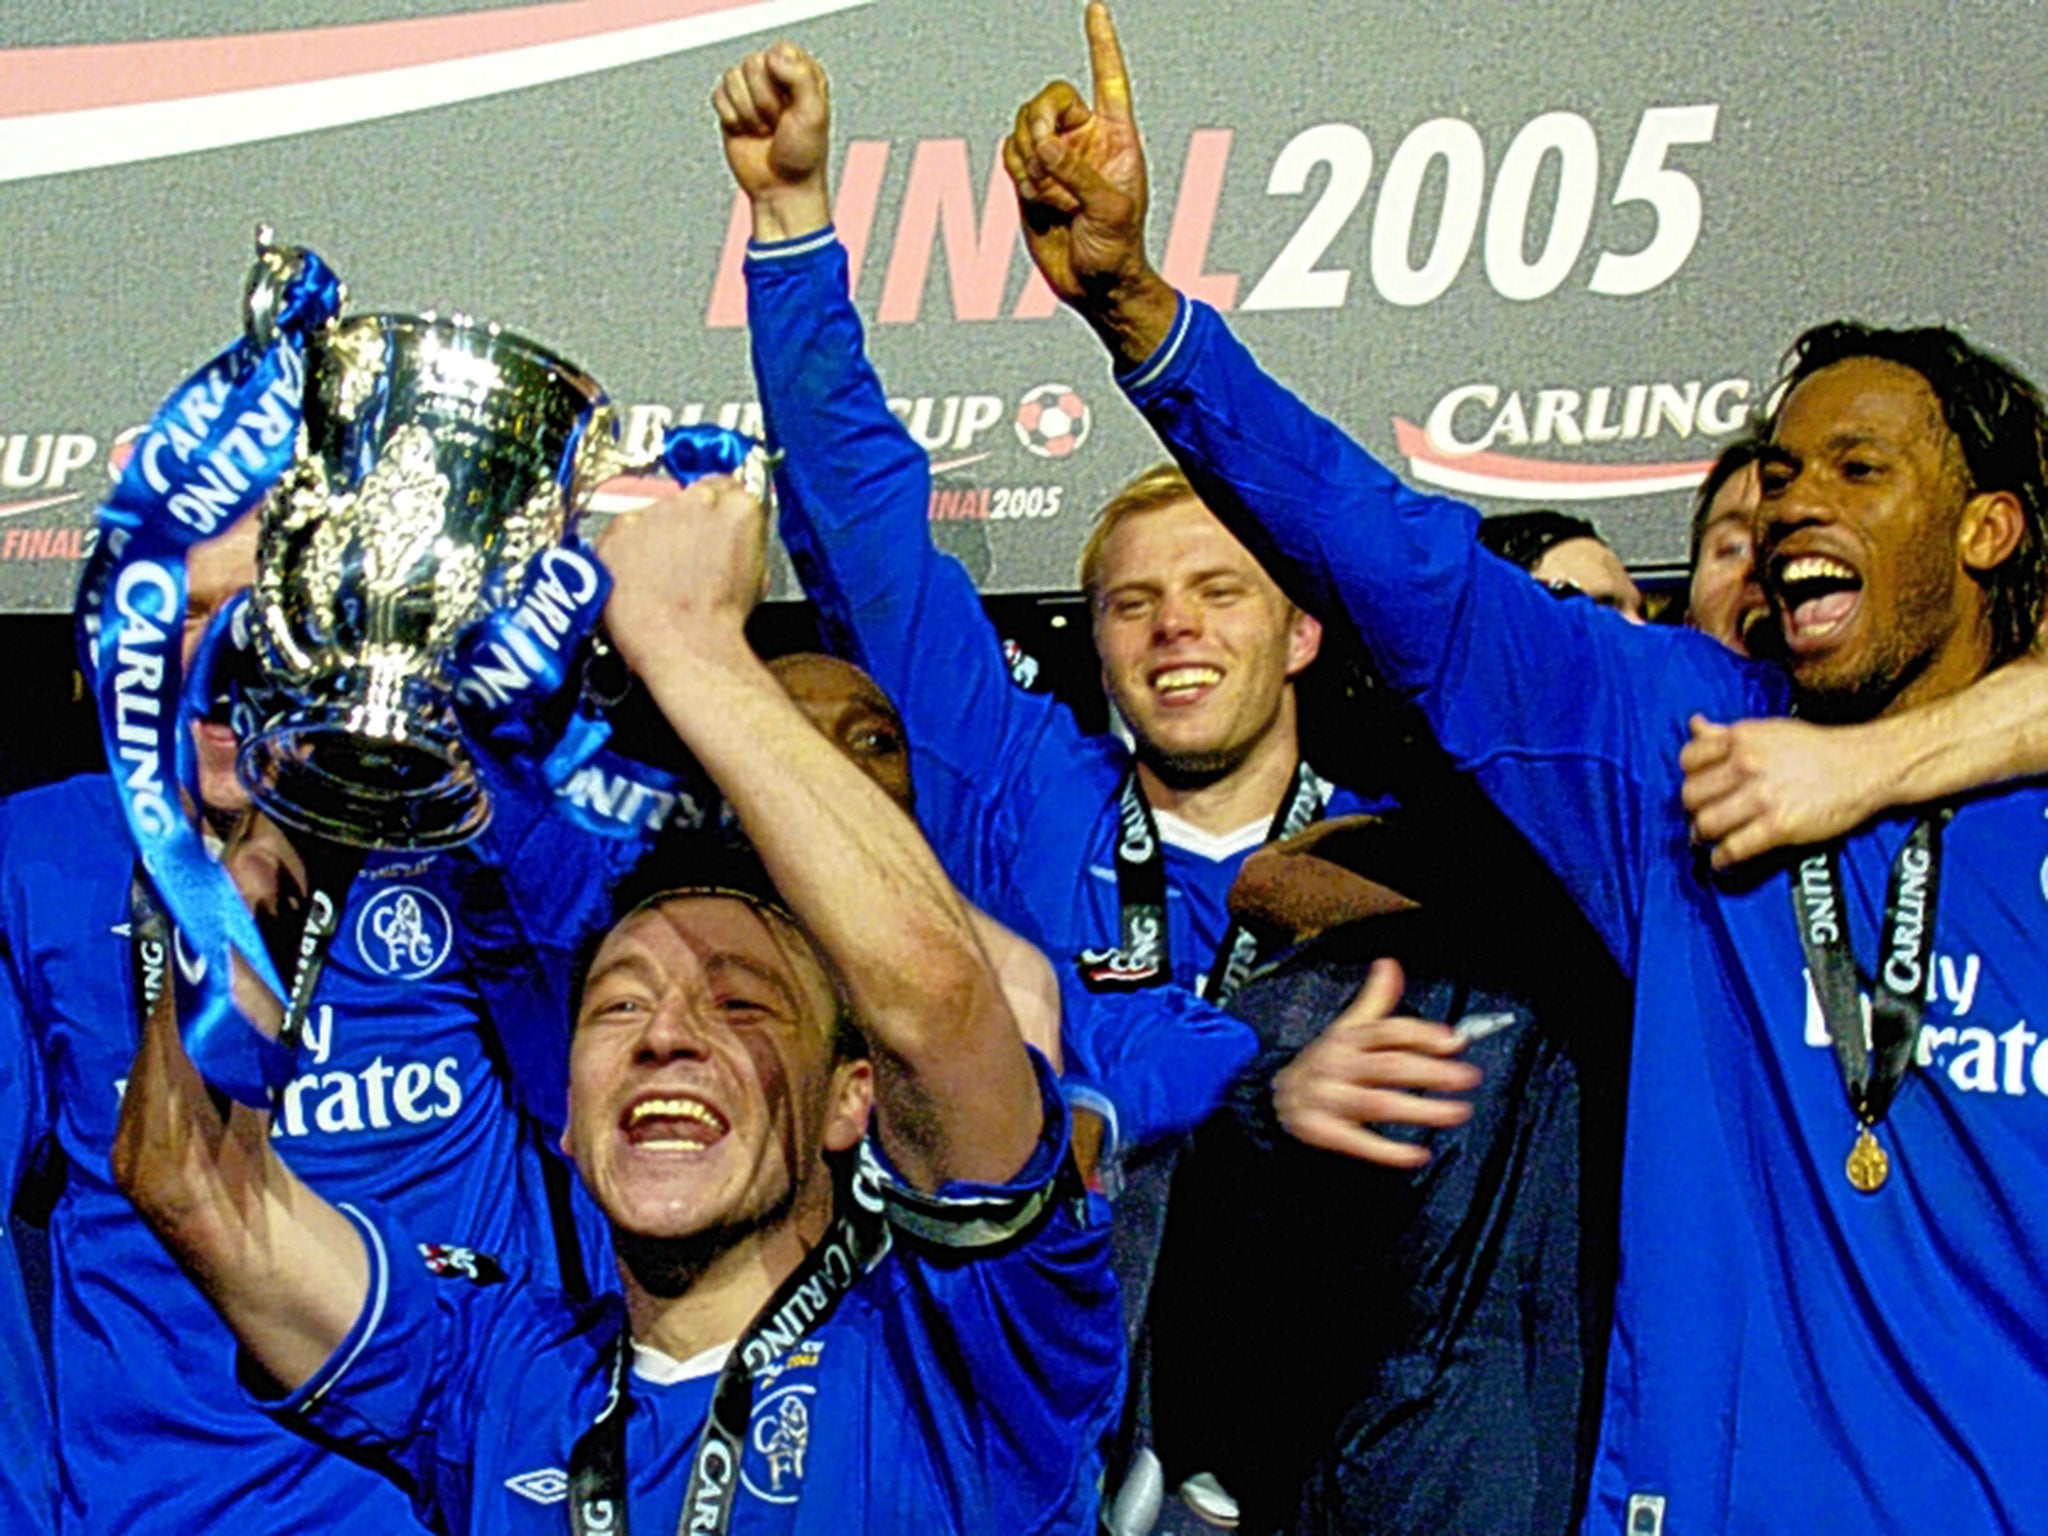 John Terry, holding trophy, celebrates with Chelsea team-mates after winning the League Cup in 2005